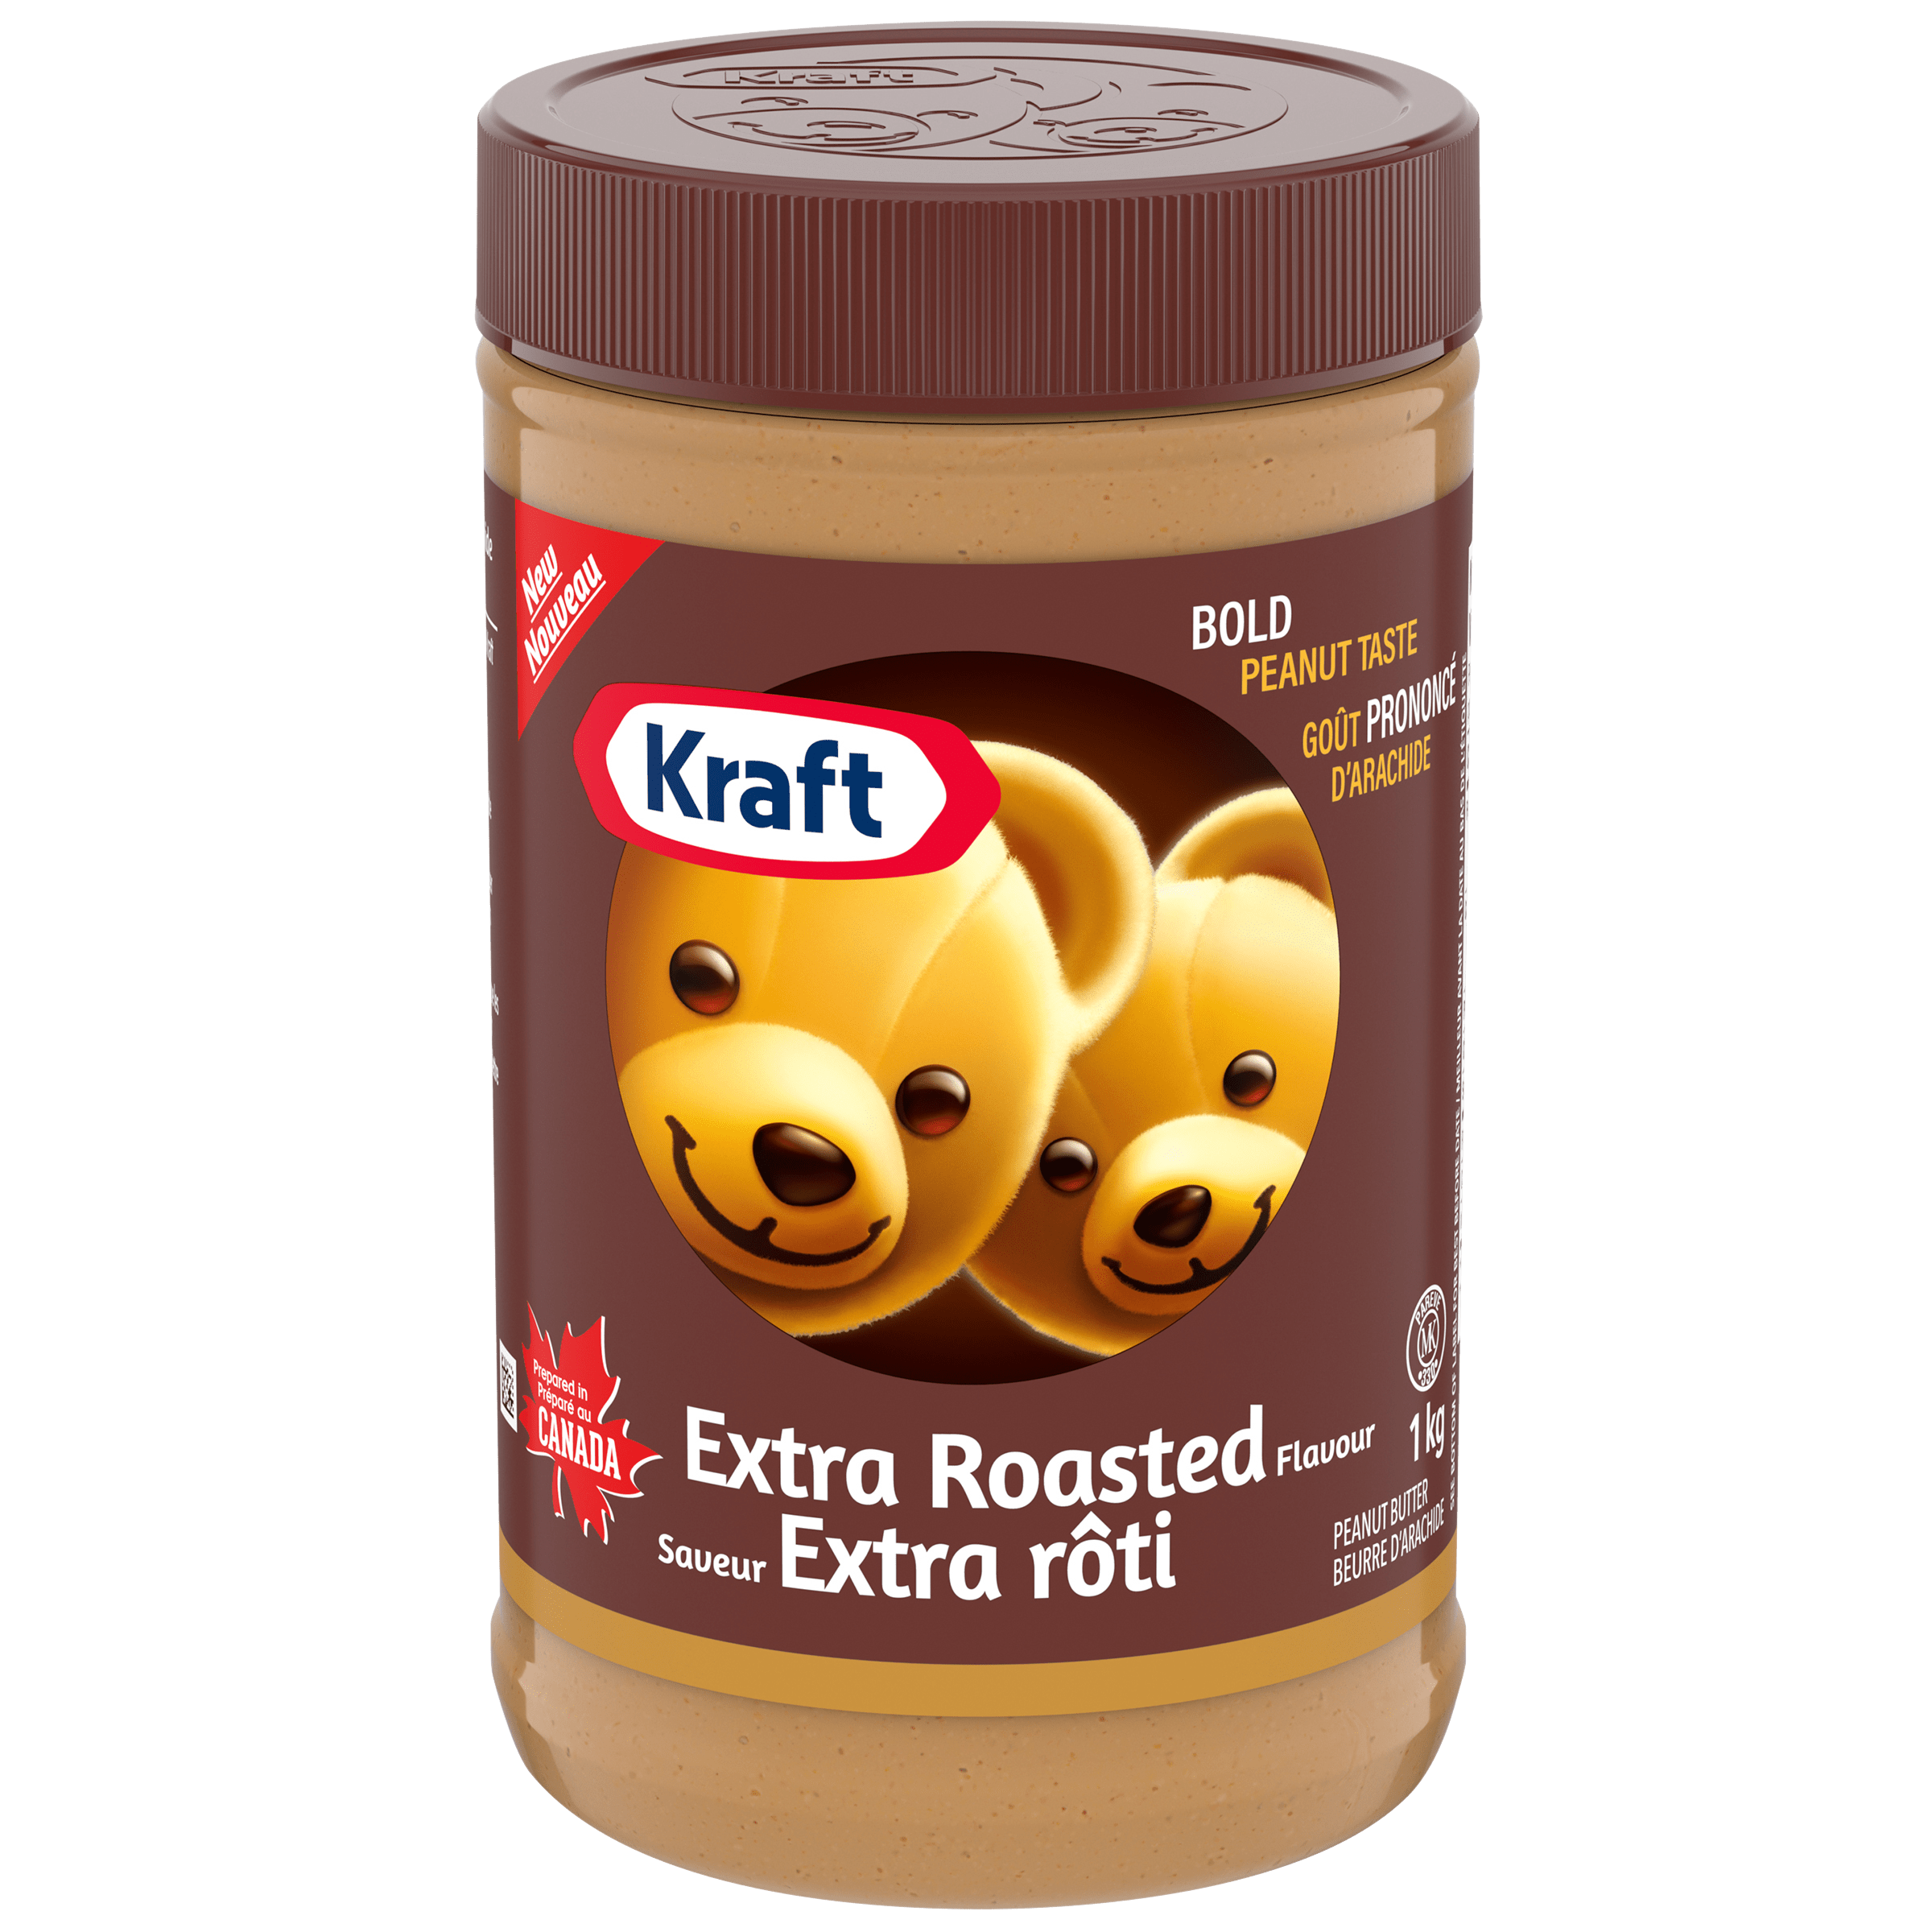 Extra Roasted Flavour Peanut Butter